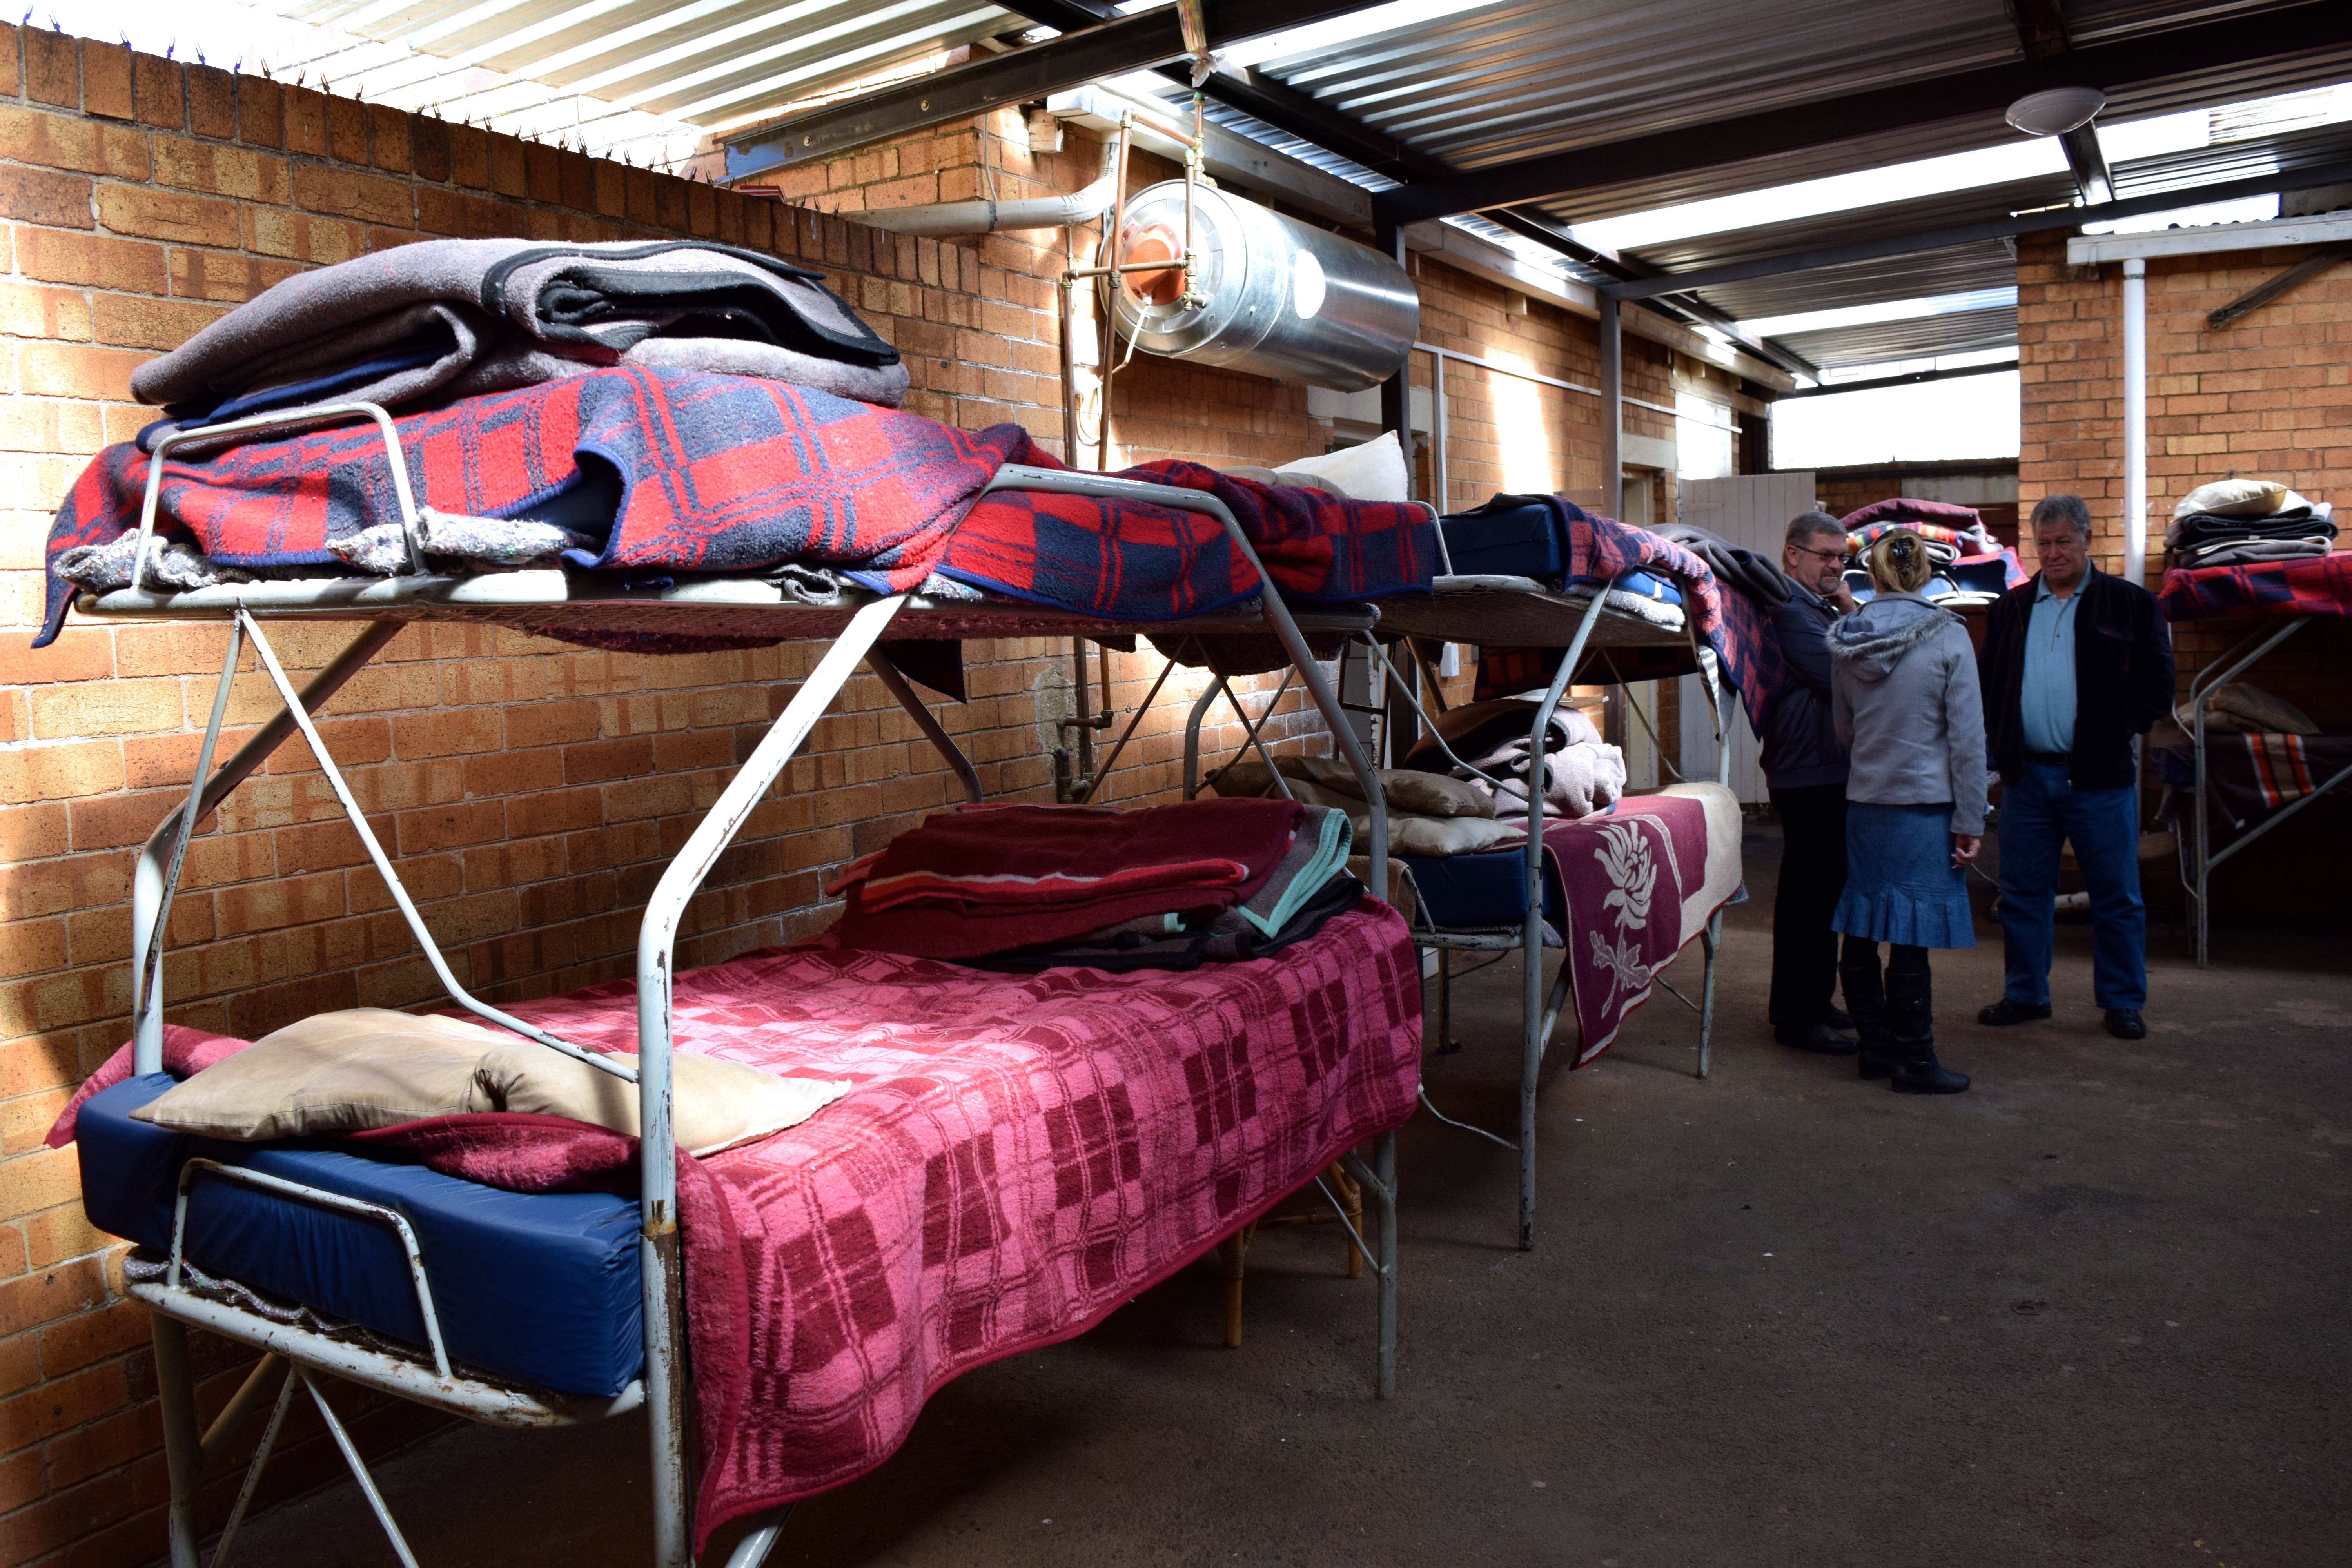 South African shelter fights homelessness "one person at a time"